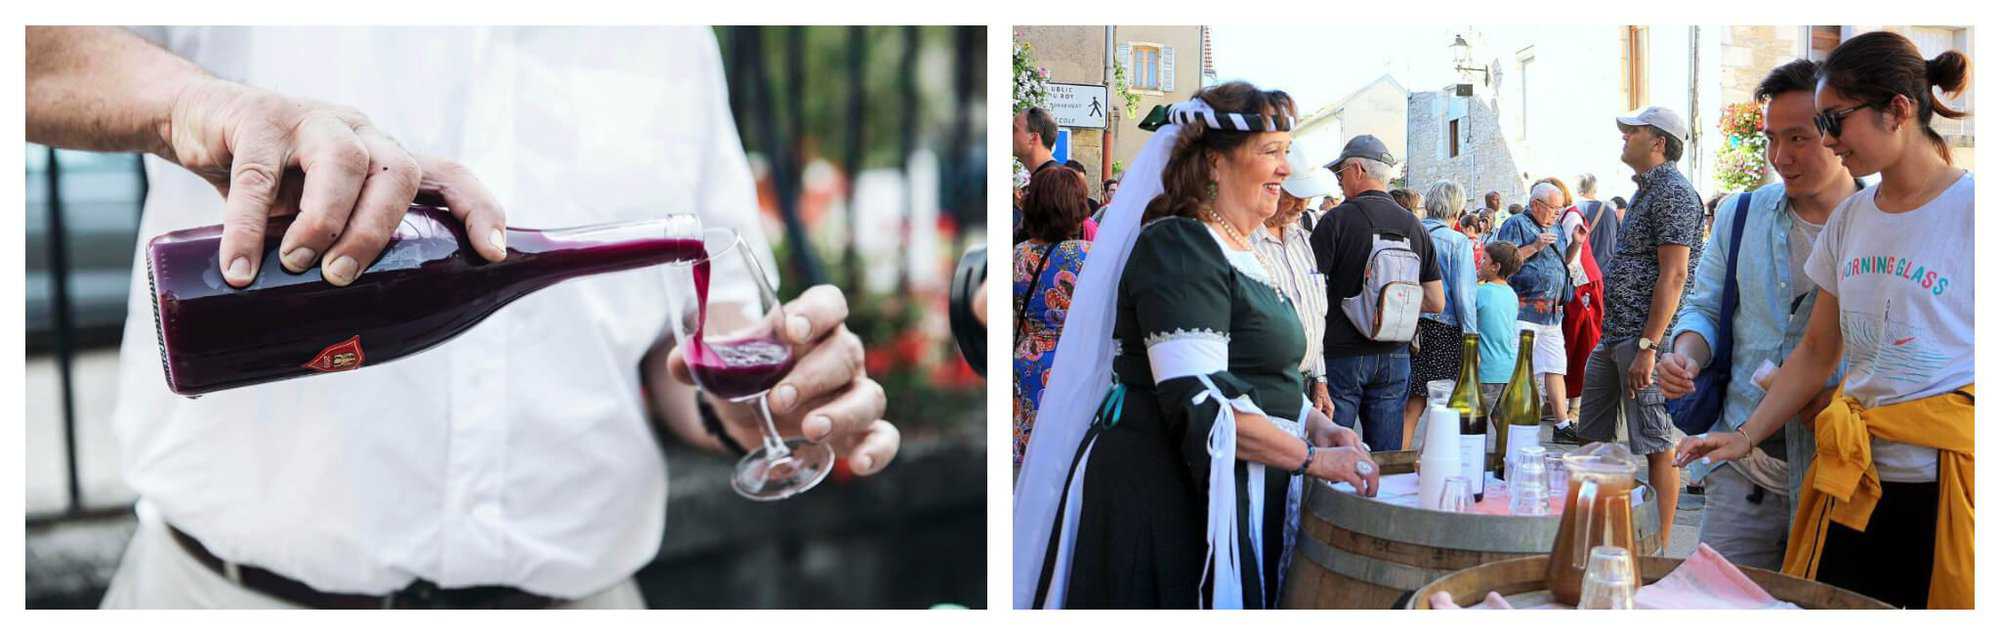 Left: A man pours a bottle of red wine into a small glass. Right: A woman in medieval costume talks to a couple of tourists.